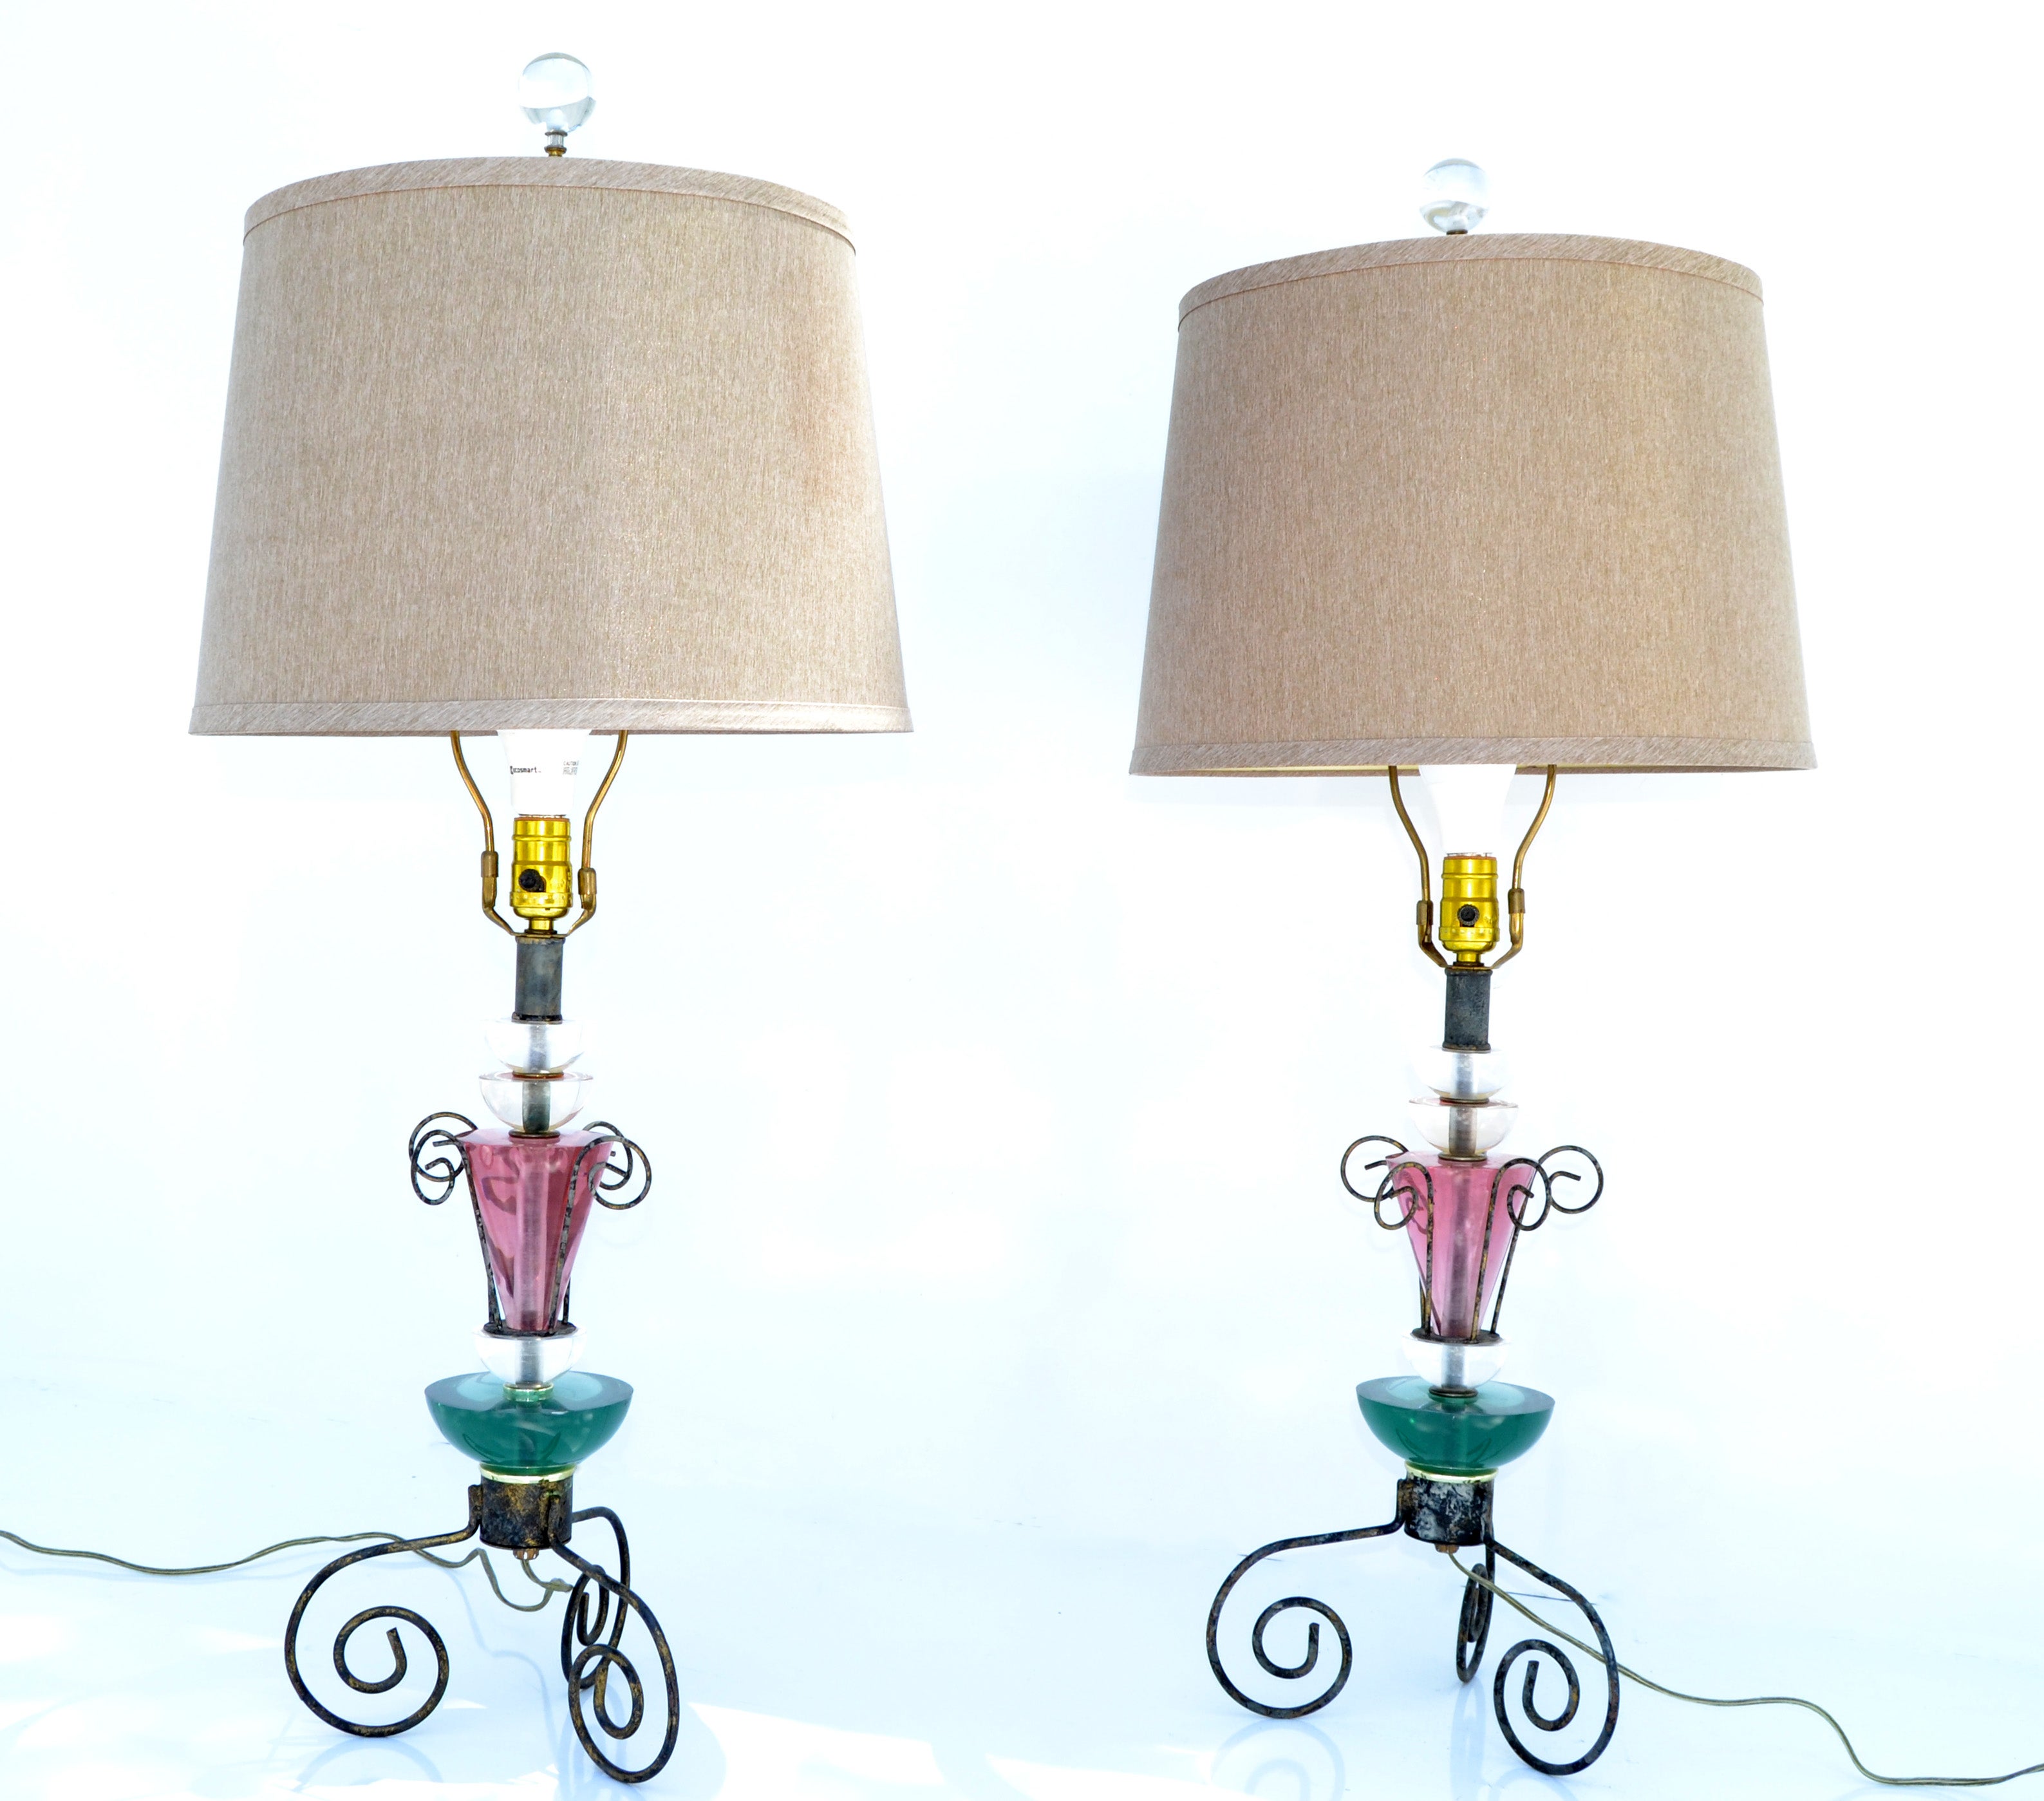 Set of Van Teal Mid-Century Modern clear, pink and green Lucite Table Lamps.
Come with Harps and Gold Shades.
US wired, UL Listed and in working condition takes 1 regular Light Bulb or LED bulb.
Measurements: 
Base 9.5 x 6.5 x 20.5 inches Height